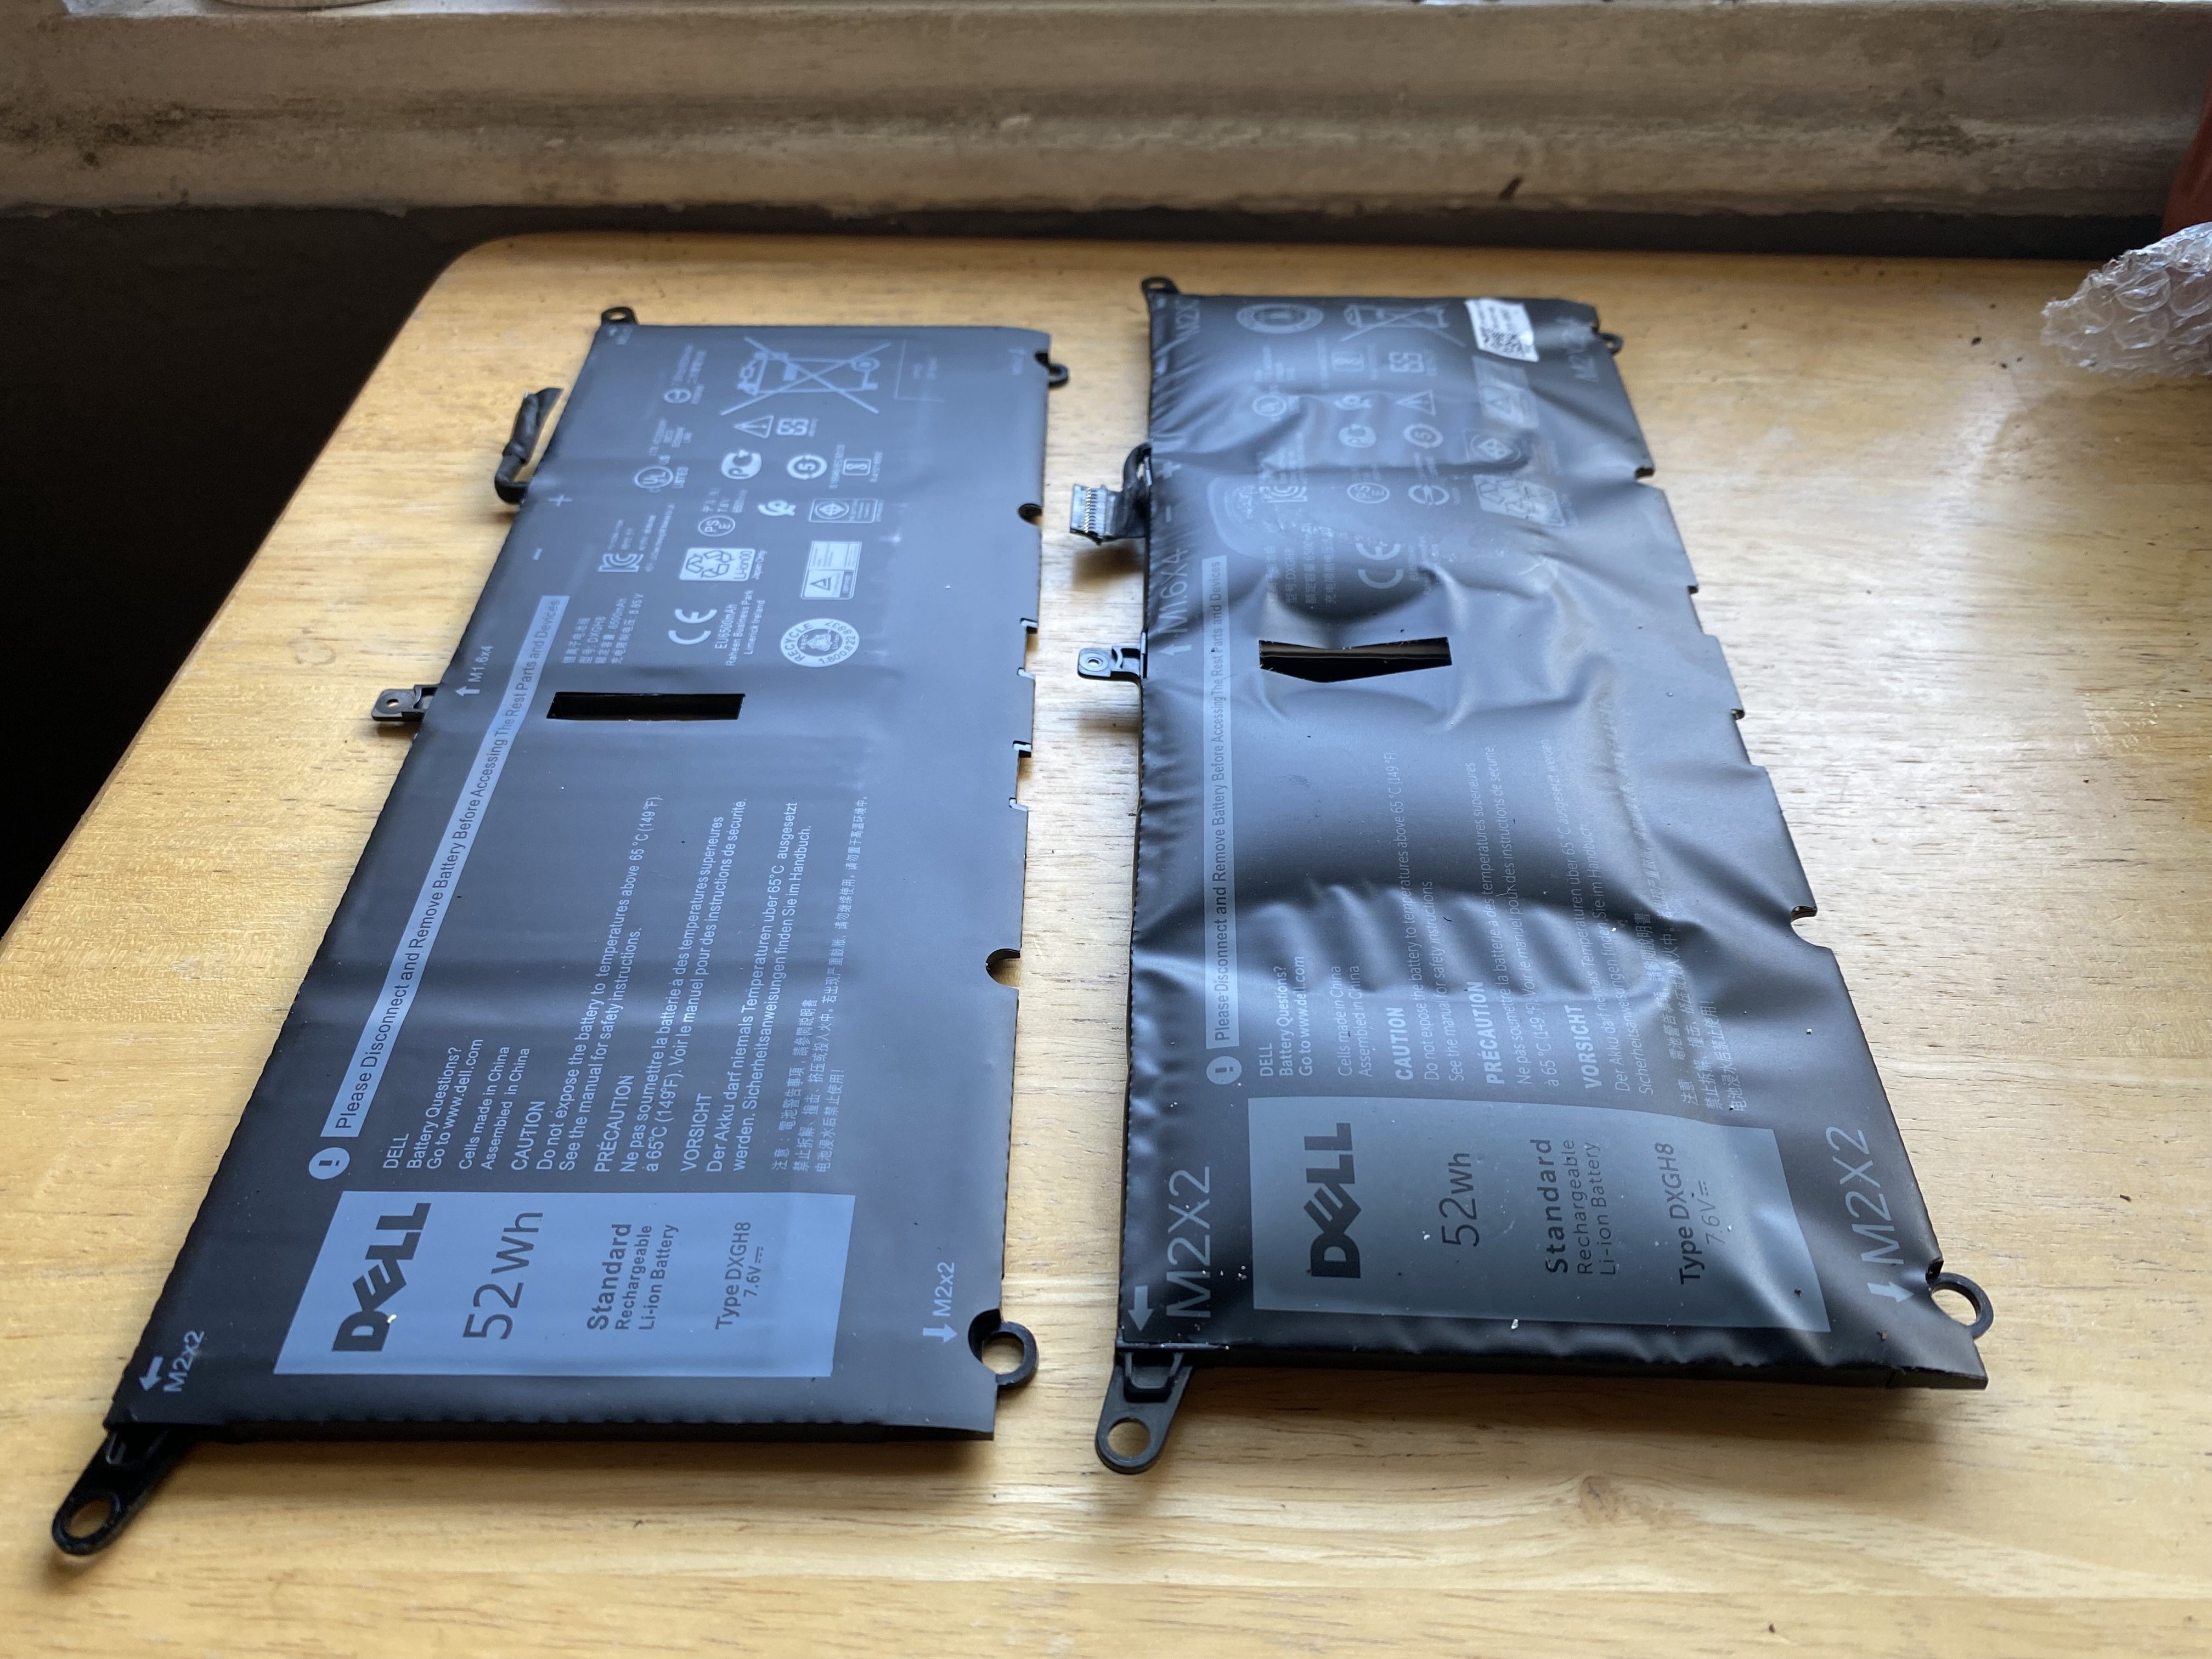 two laptop batteries side by side, one is bulging